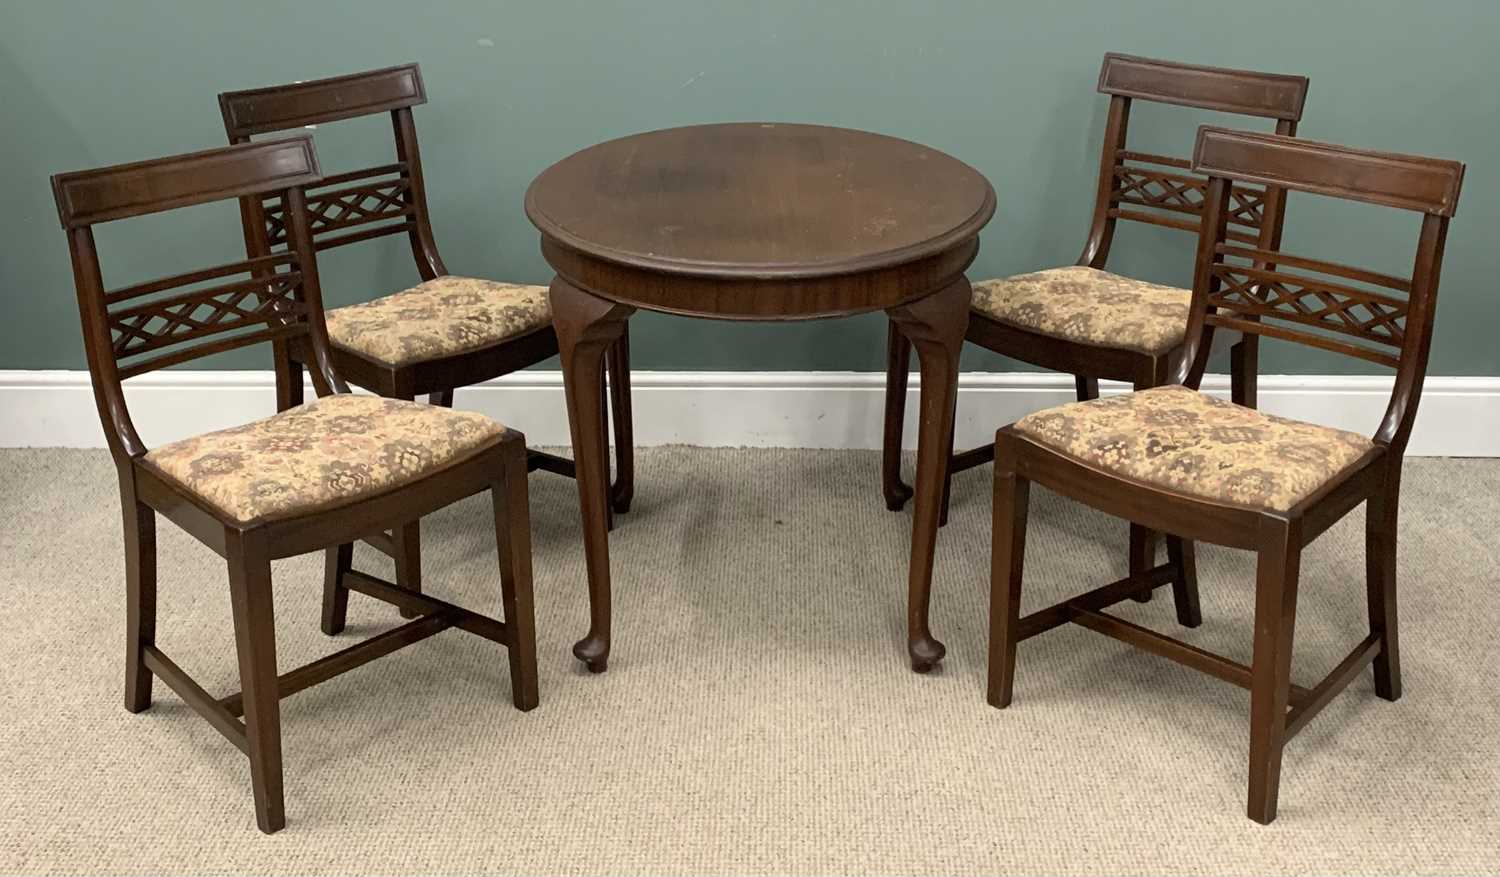 EDWARDIAN MAHOGANY OVAL TEA TABLE on turned supports, 73 (h) x 108 (w) x 78 (d) cms and FOUR SABRE